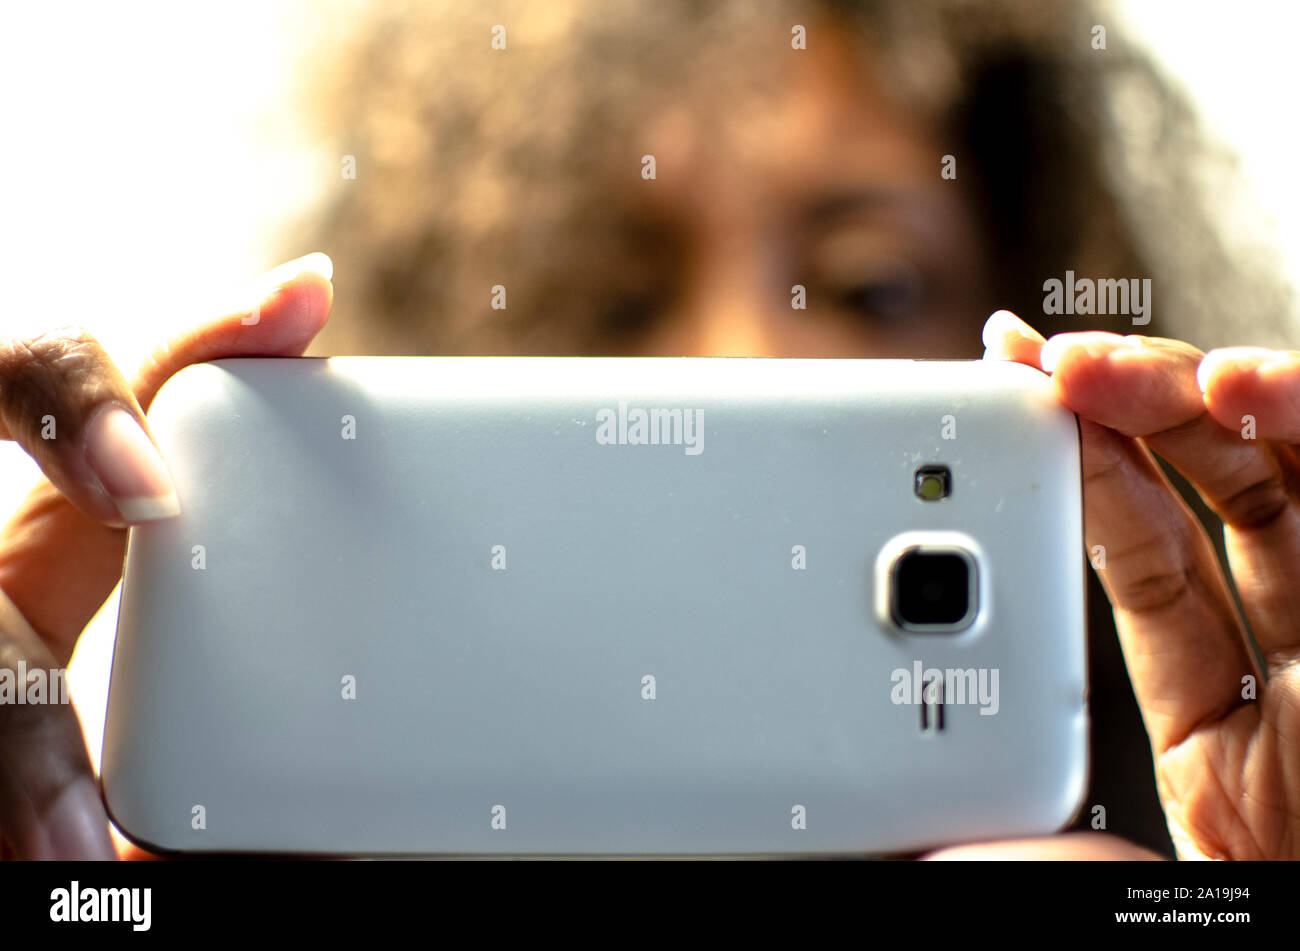 Black woman taking a picture. Selective focus on foreground (smartphone and fingers) blurred background (person) Stock Photo